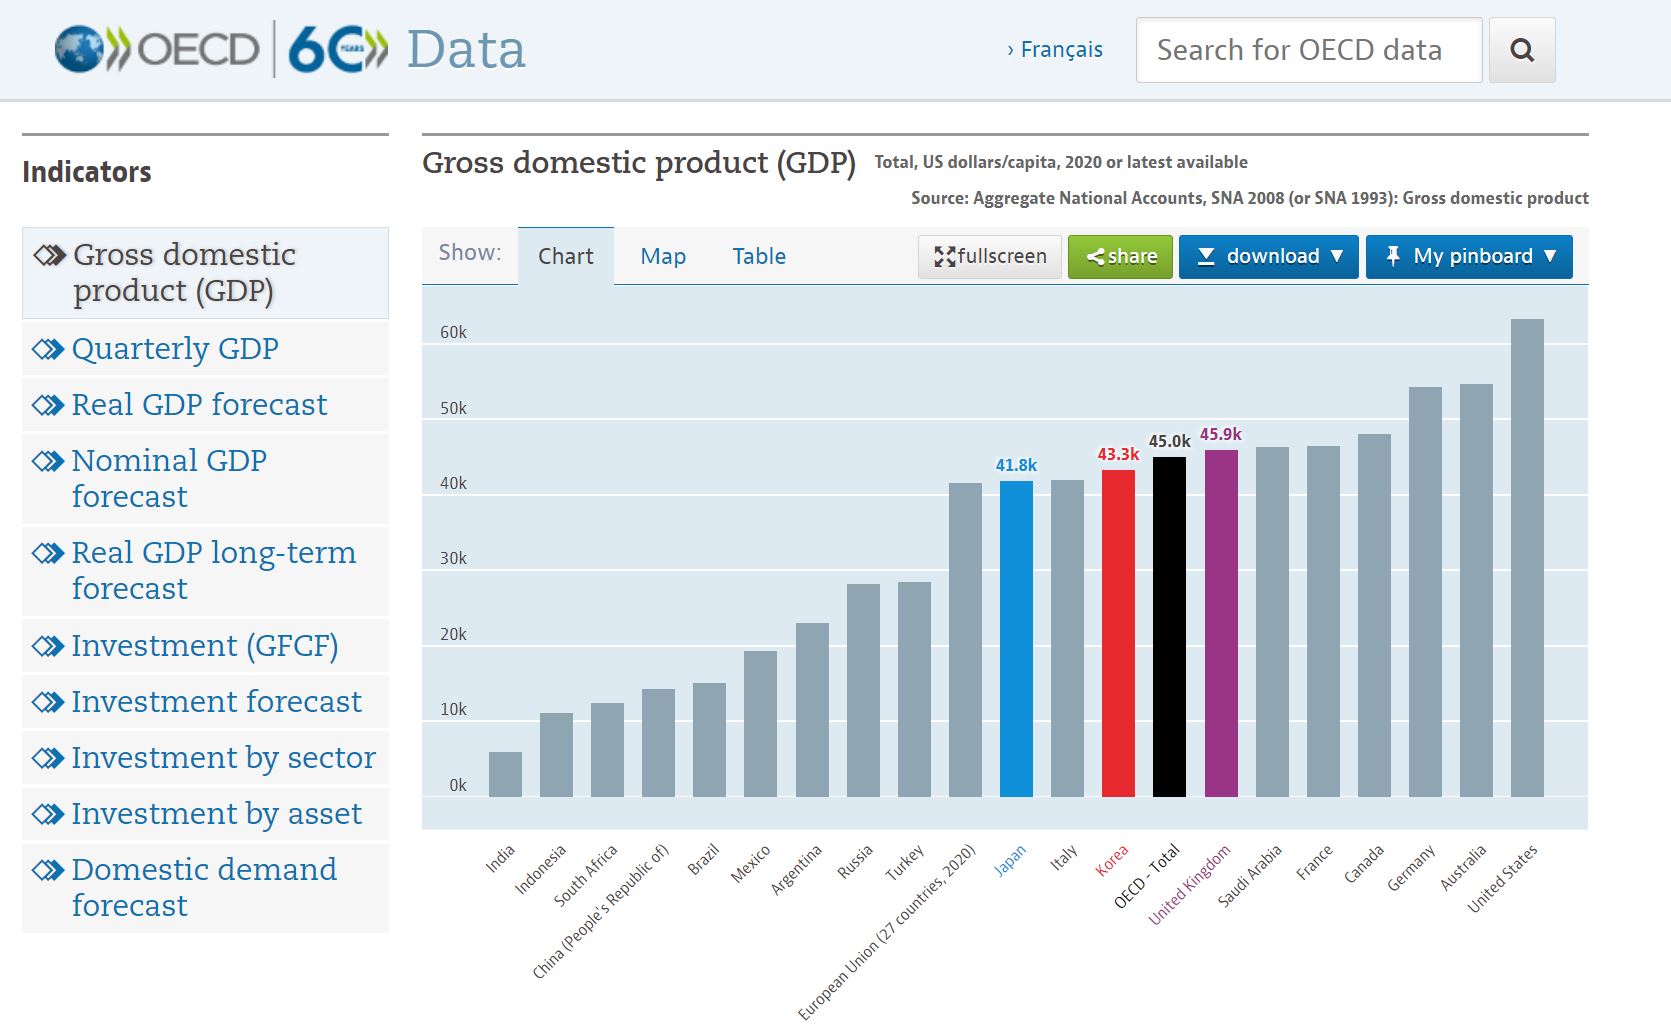 OECD 홈페이지(https://data.oecd.org/gdp/gross-domestic-product-gdp.htm)